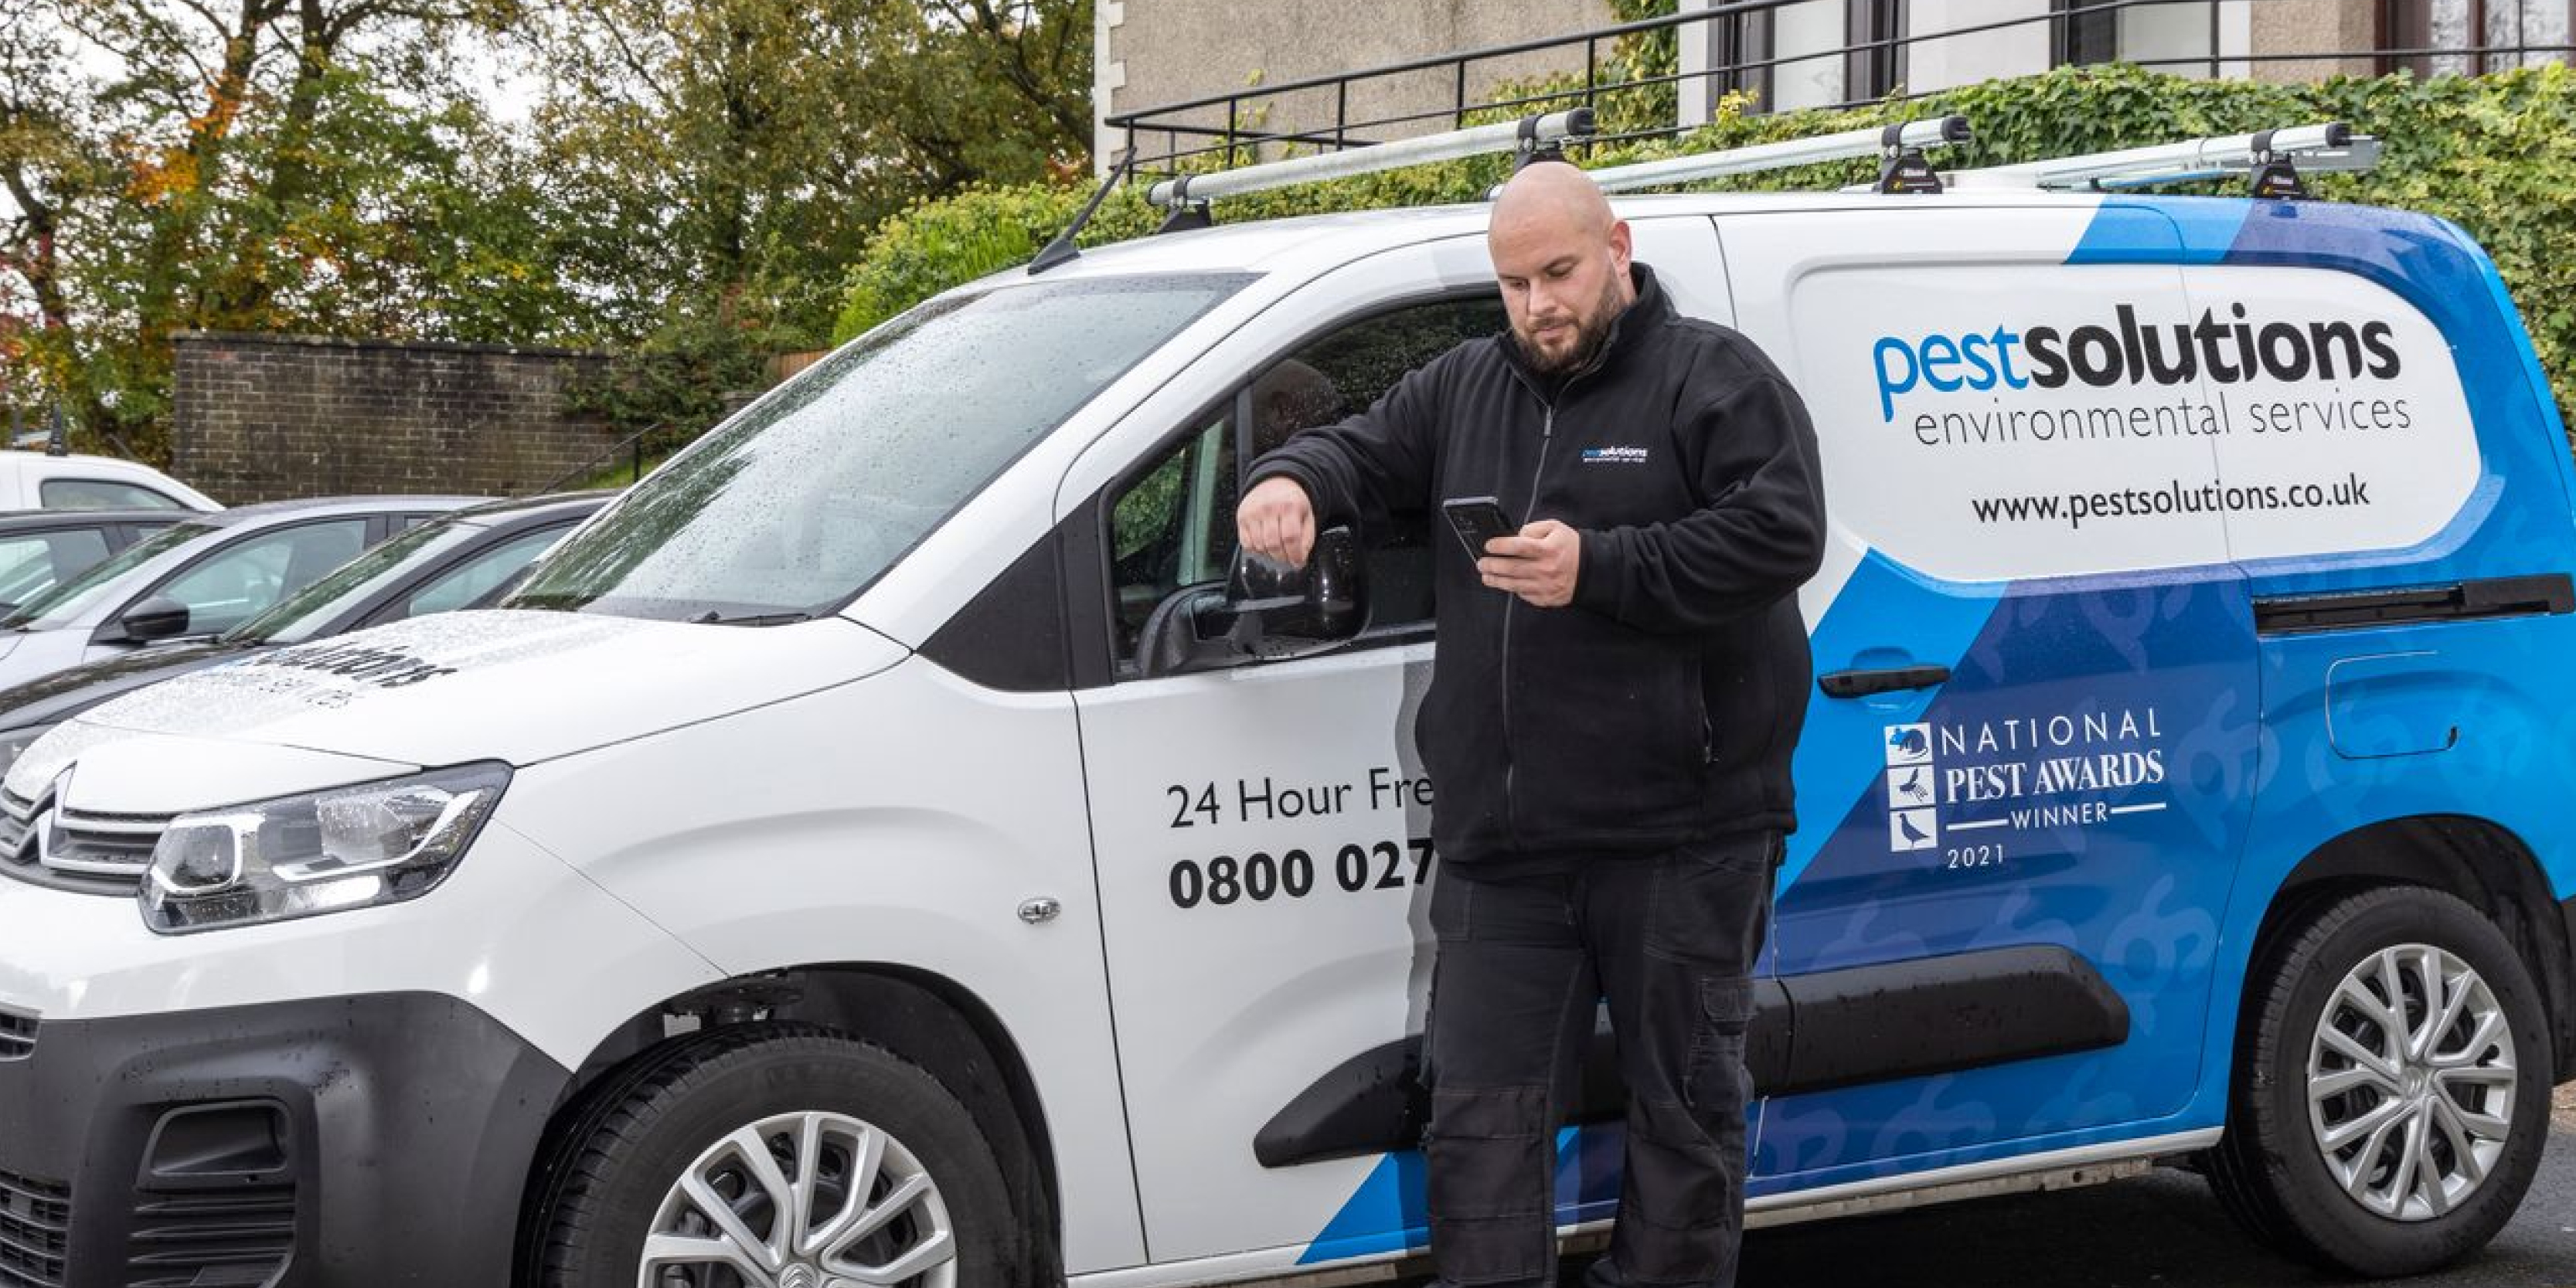 Call Pest Solutions Morley|Morley Area Pest Solutions|Morley Branch of Pest Solutions|Morley Office Pest Solutions|Morley Pest Solutions Team|Morley Scotland Pest Solutions|Pest Solutions Morley Branch|Pest Solutions Morley|Pest Solutions in Morley|Pest Solutions Team in Morley}